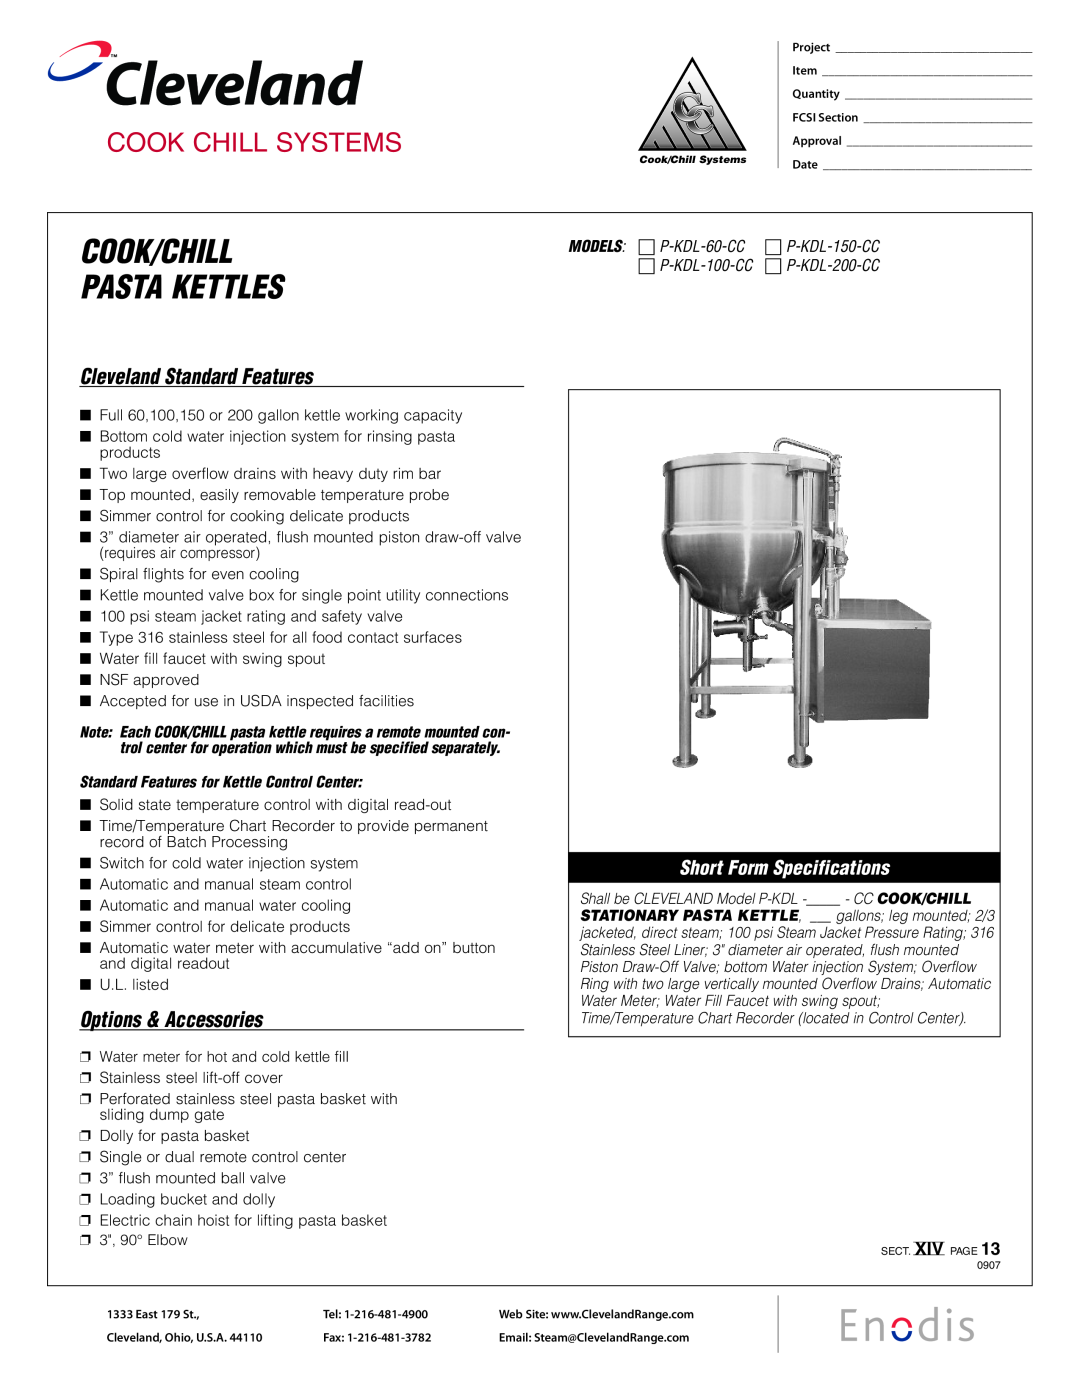 Cleveland Range P-KDL-150-CC specifications Cleveland, Cook/Chill Pasta Kettles, Cook Chill Systems, Options & Accessories 